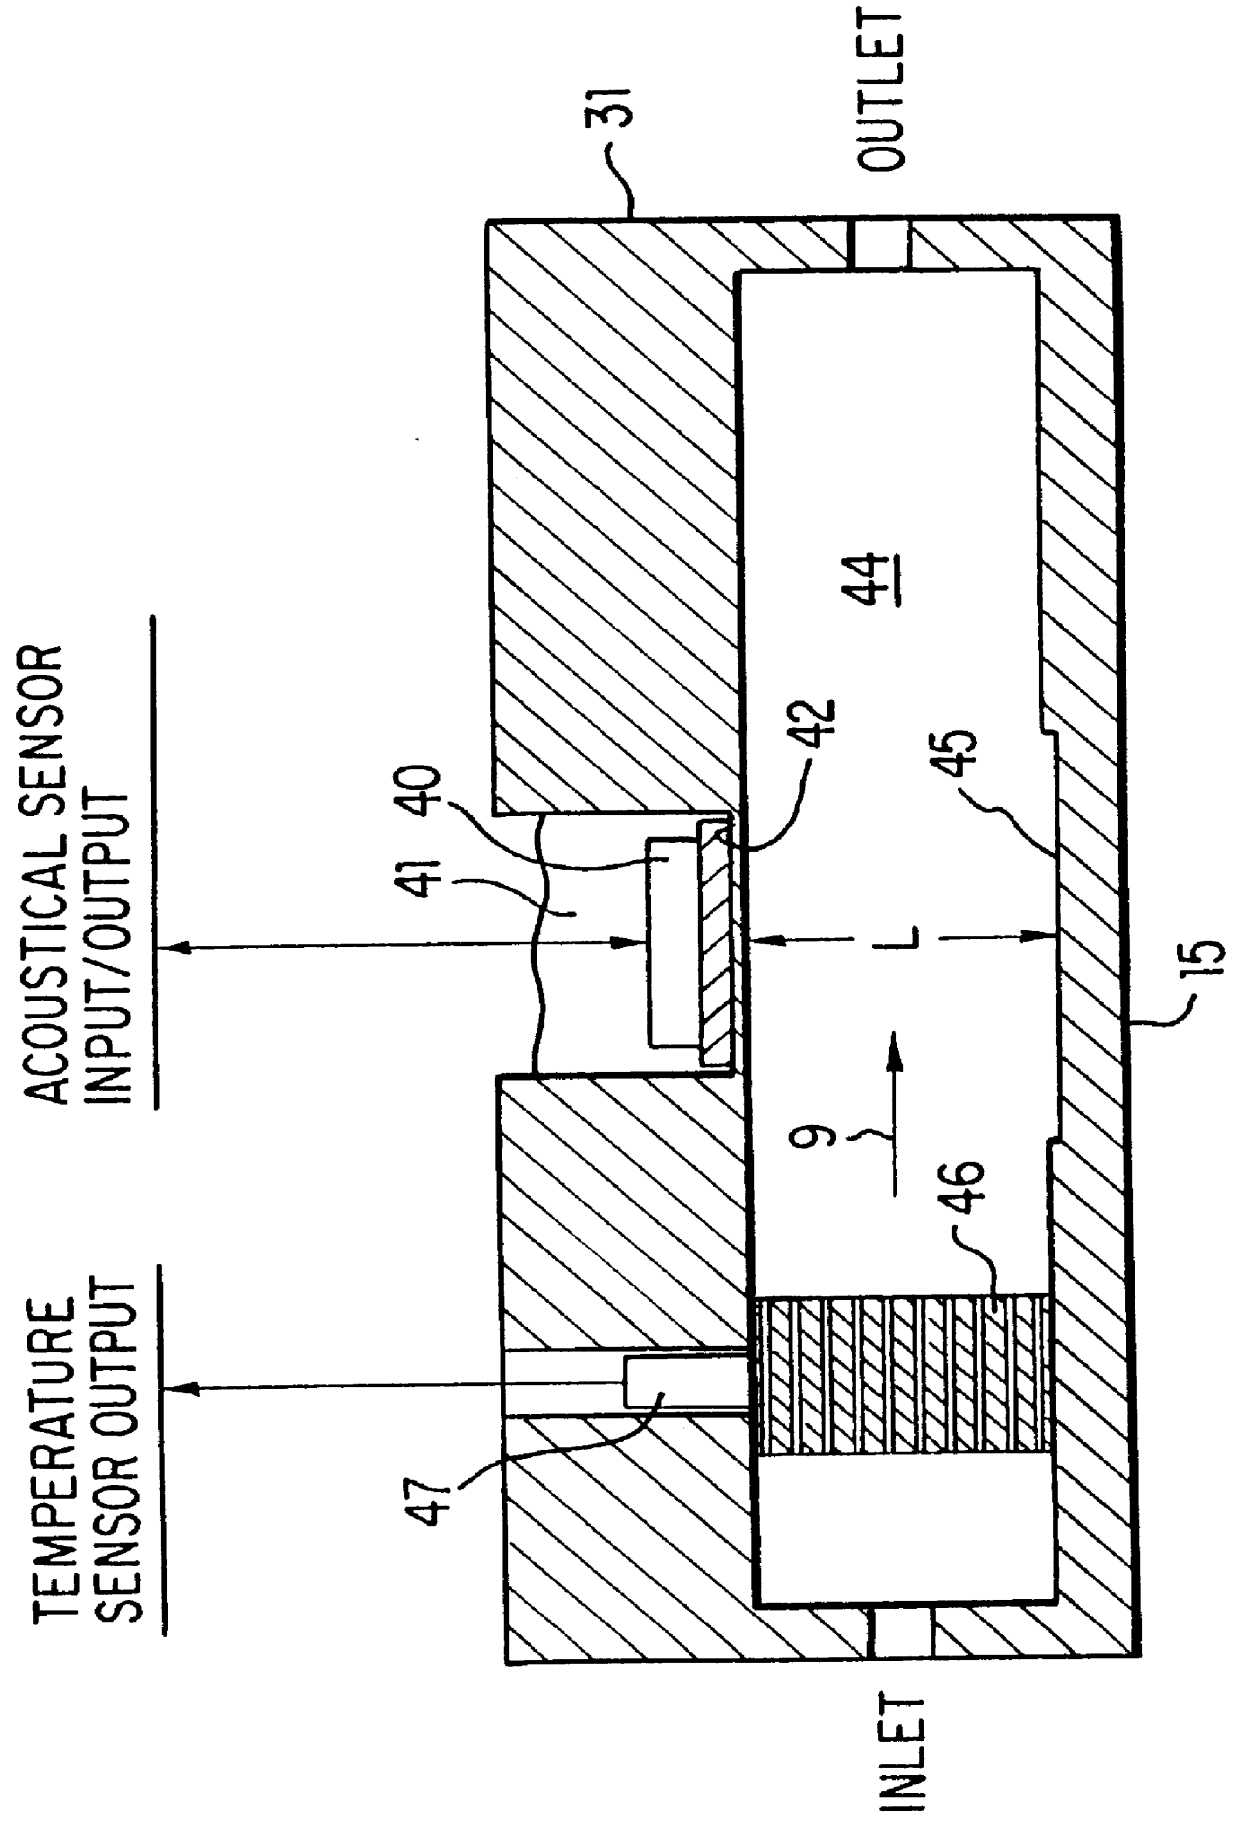 Apparatus and methods for performing acoustical measurements